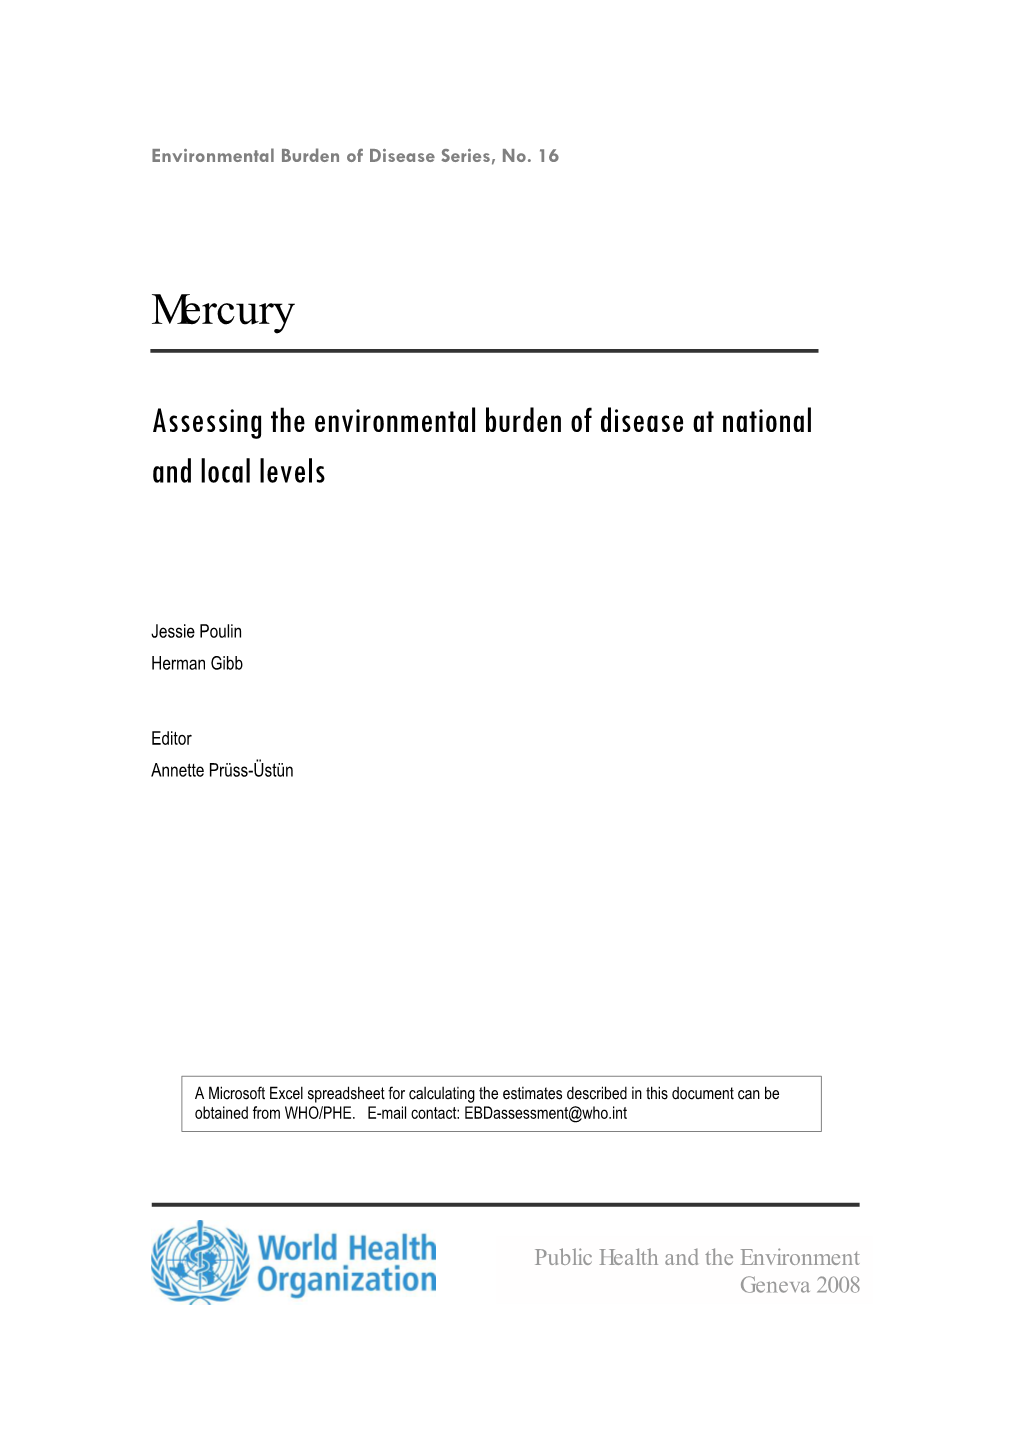 Mercury: Assessing the Environmental Burden of Disease at National and Local Levels